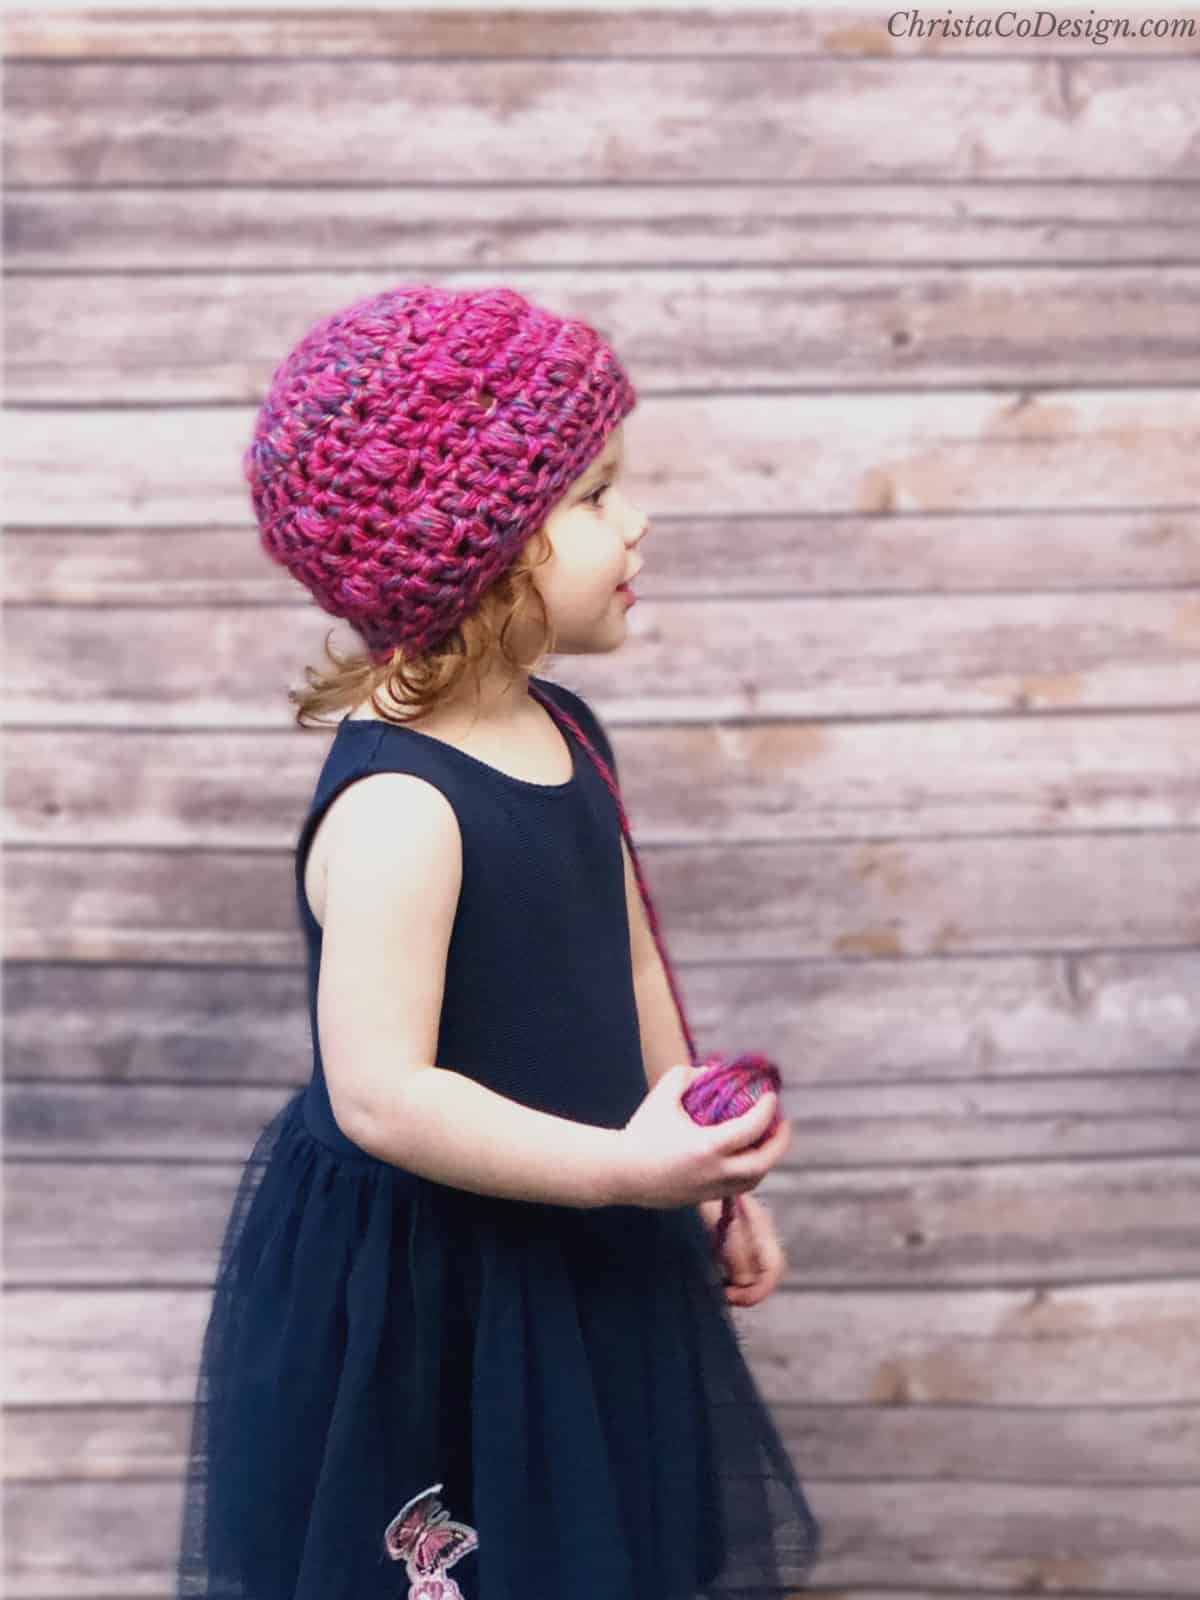 Girl in pink crochet beanie turned to the side with ball of yarn in hand.